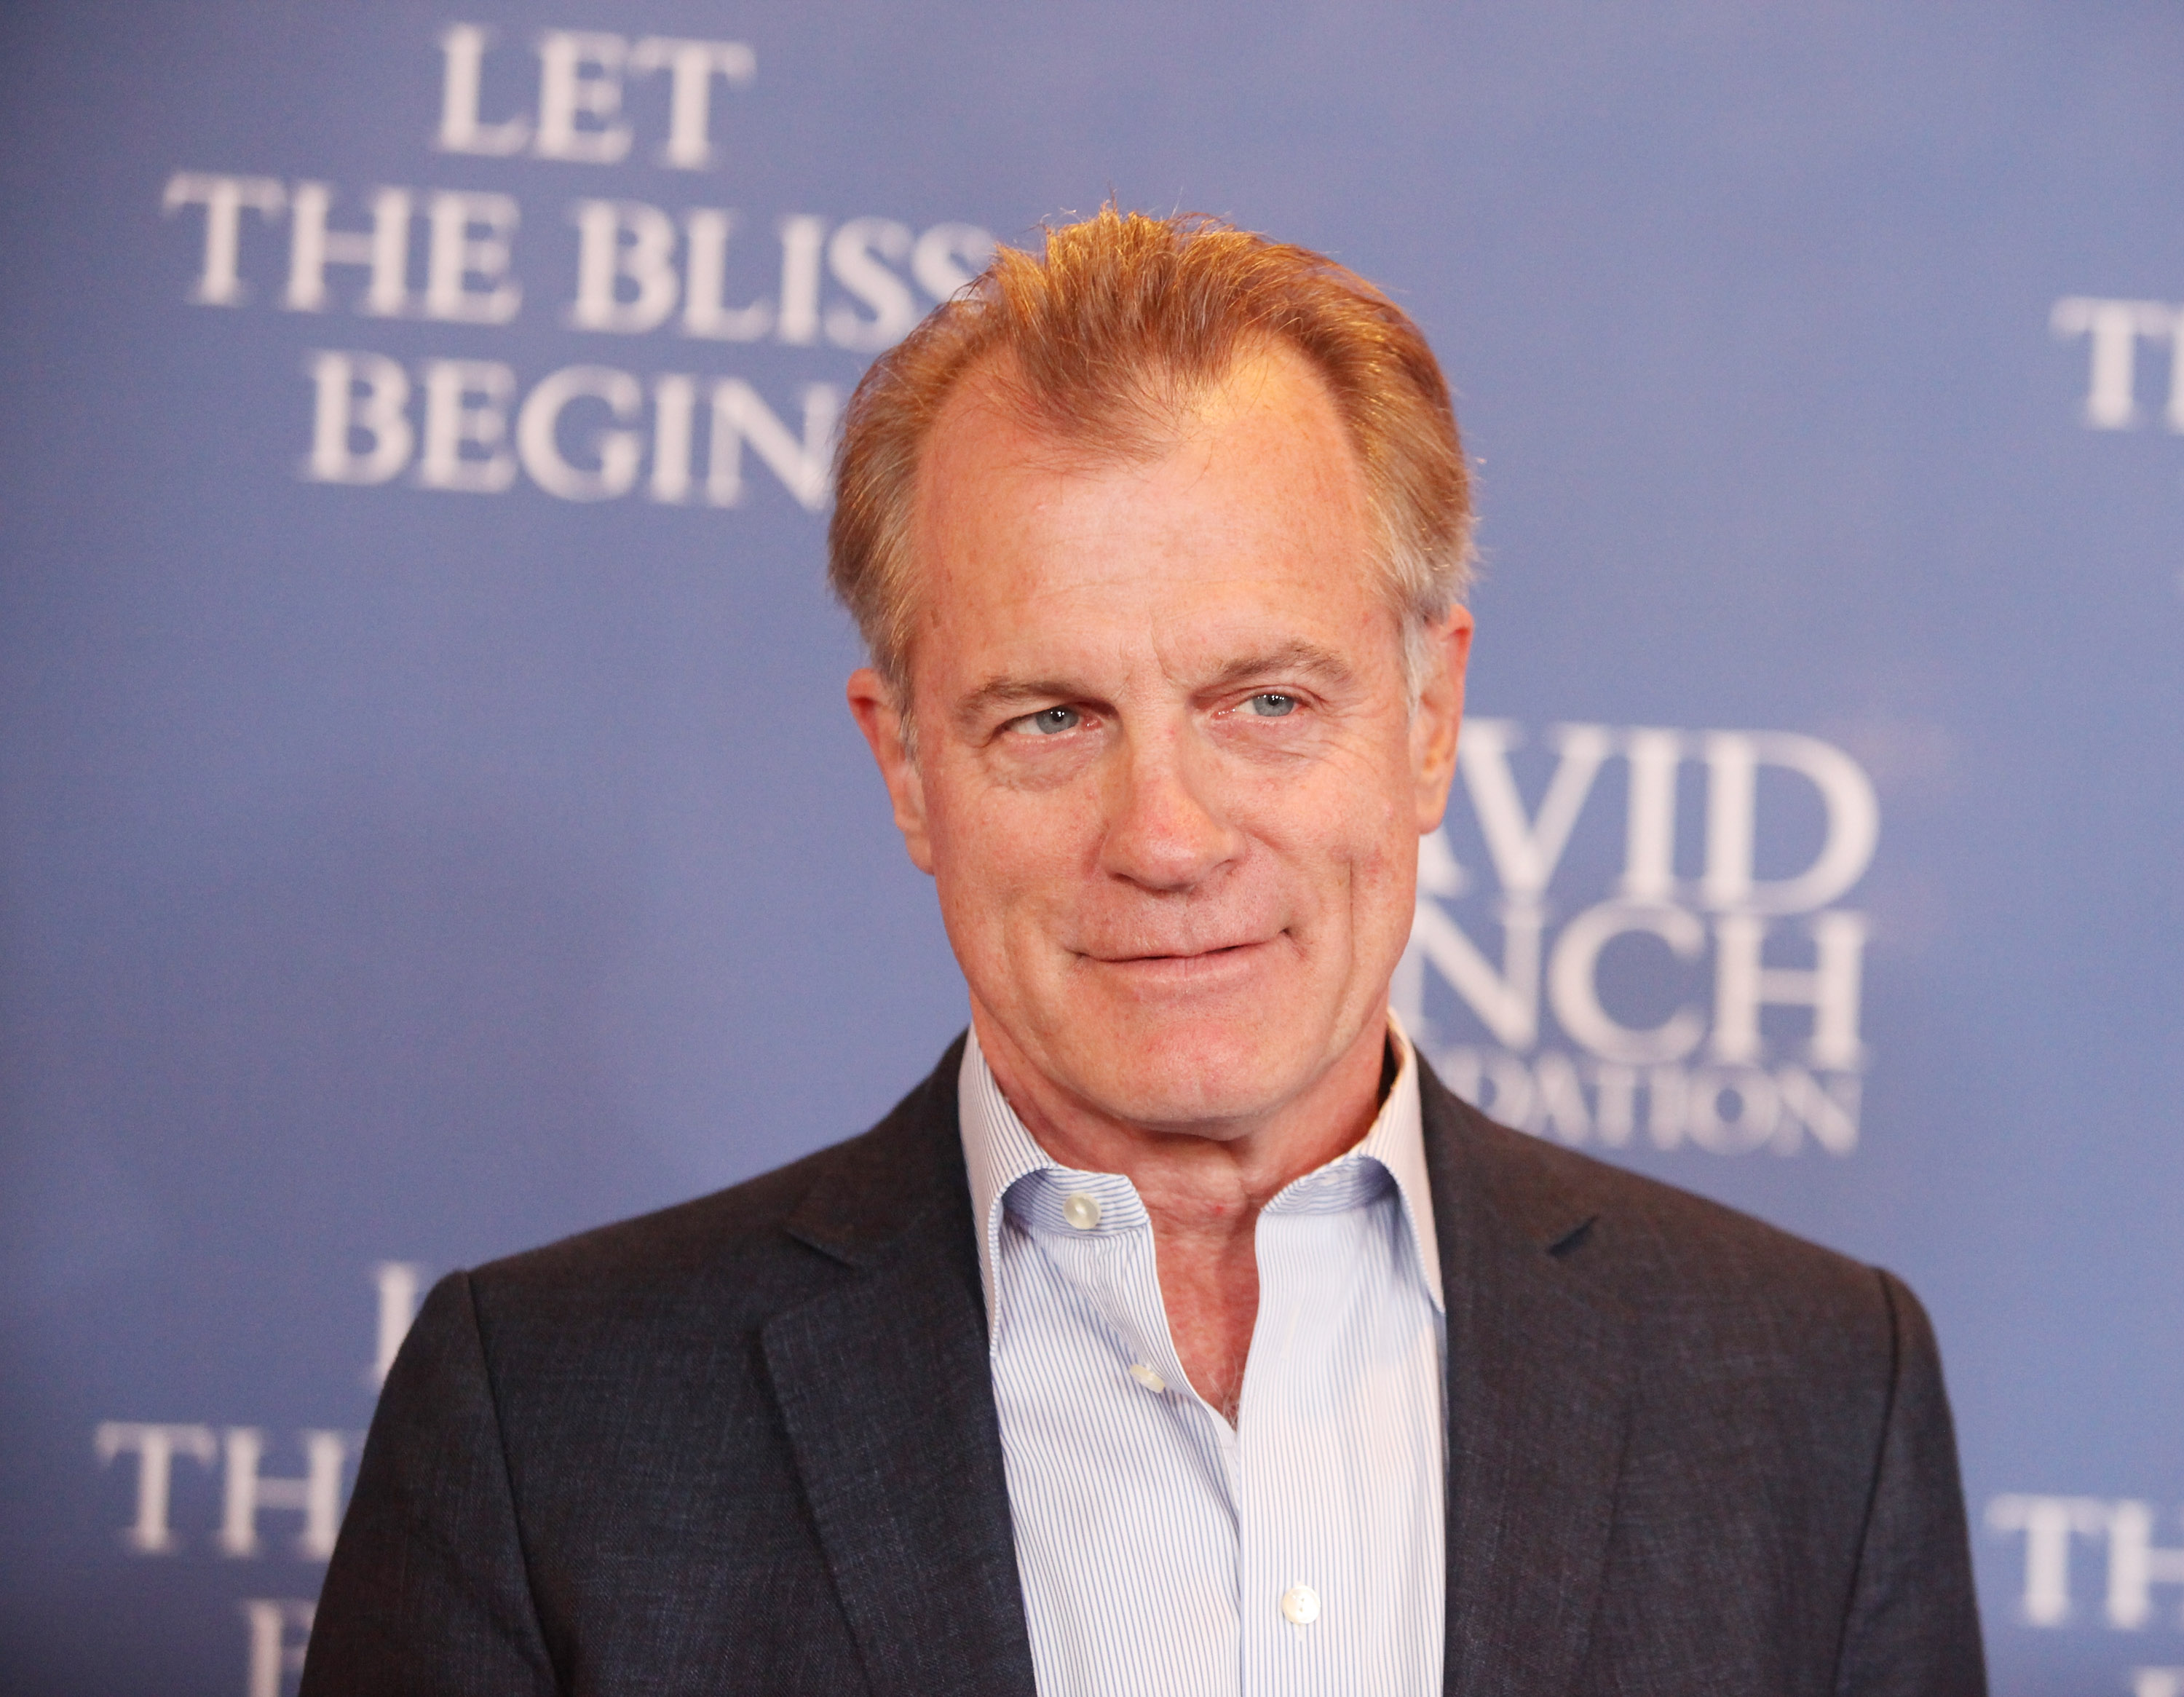 BEVERLY HILLS, CA - JUNE 30: Stephen Collins arrives at The David Lynch Foundation hosts a "Night of Comedy" held at the Beverly Wilshire hotel on June 30, 2012 in Beverly Hills, California. (Photo by Michael Tran/FilmMagic) (Michael Tran—FilmMagic)